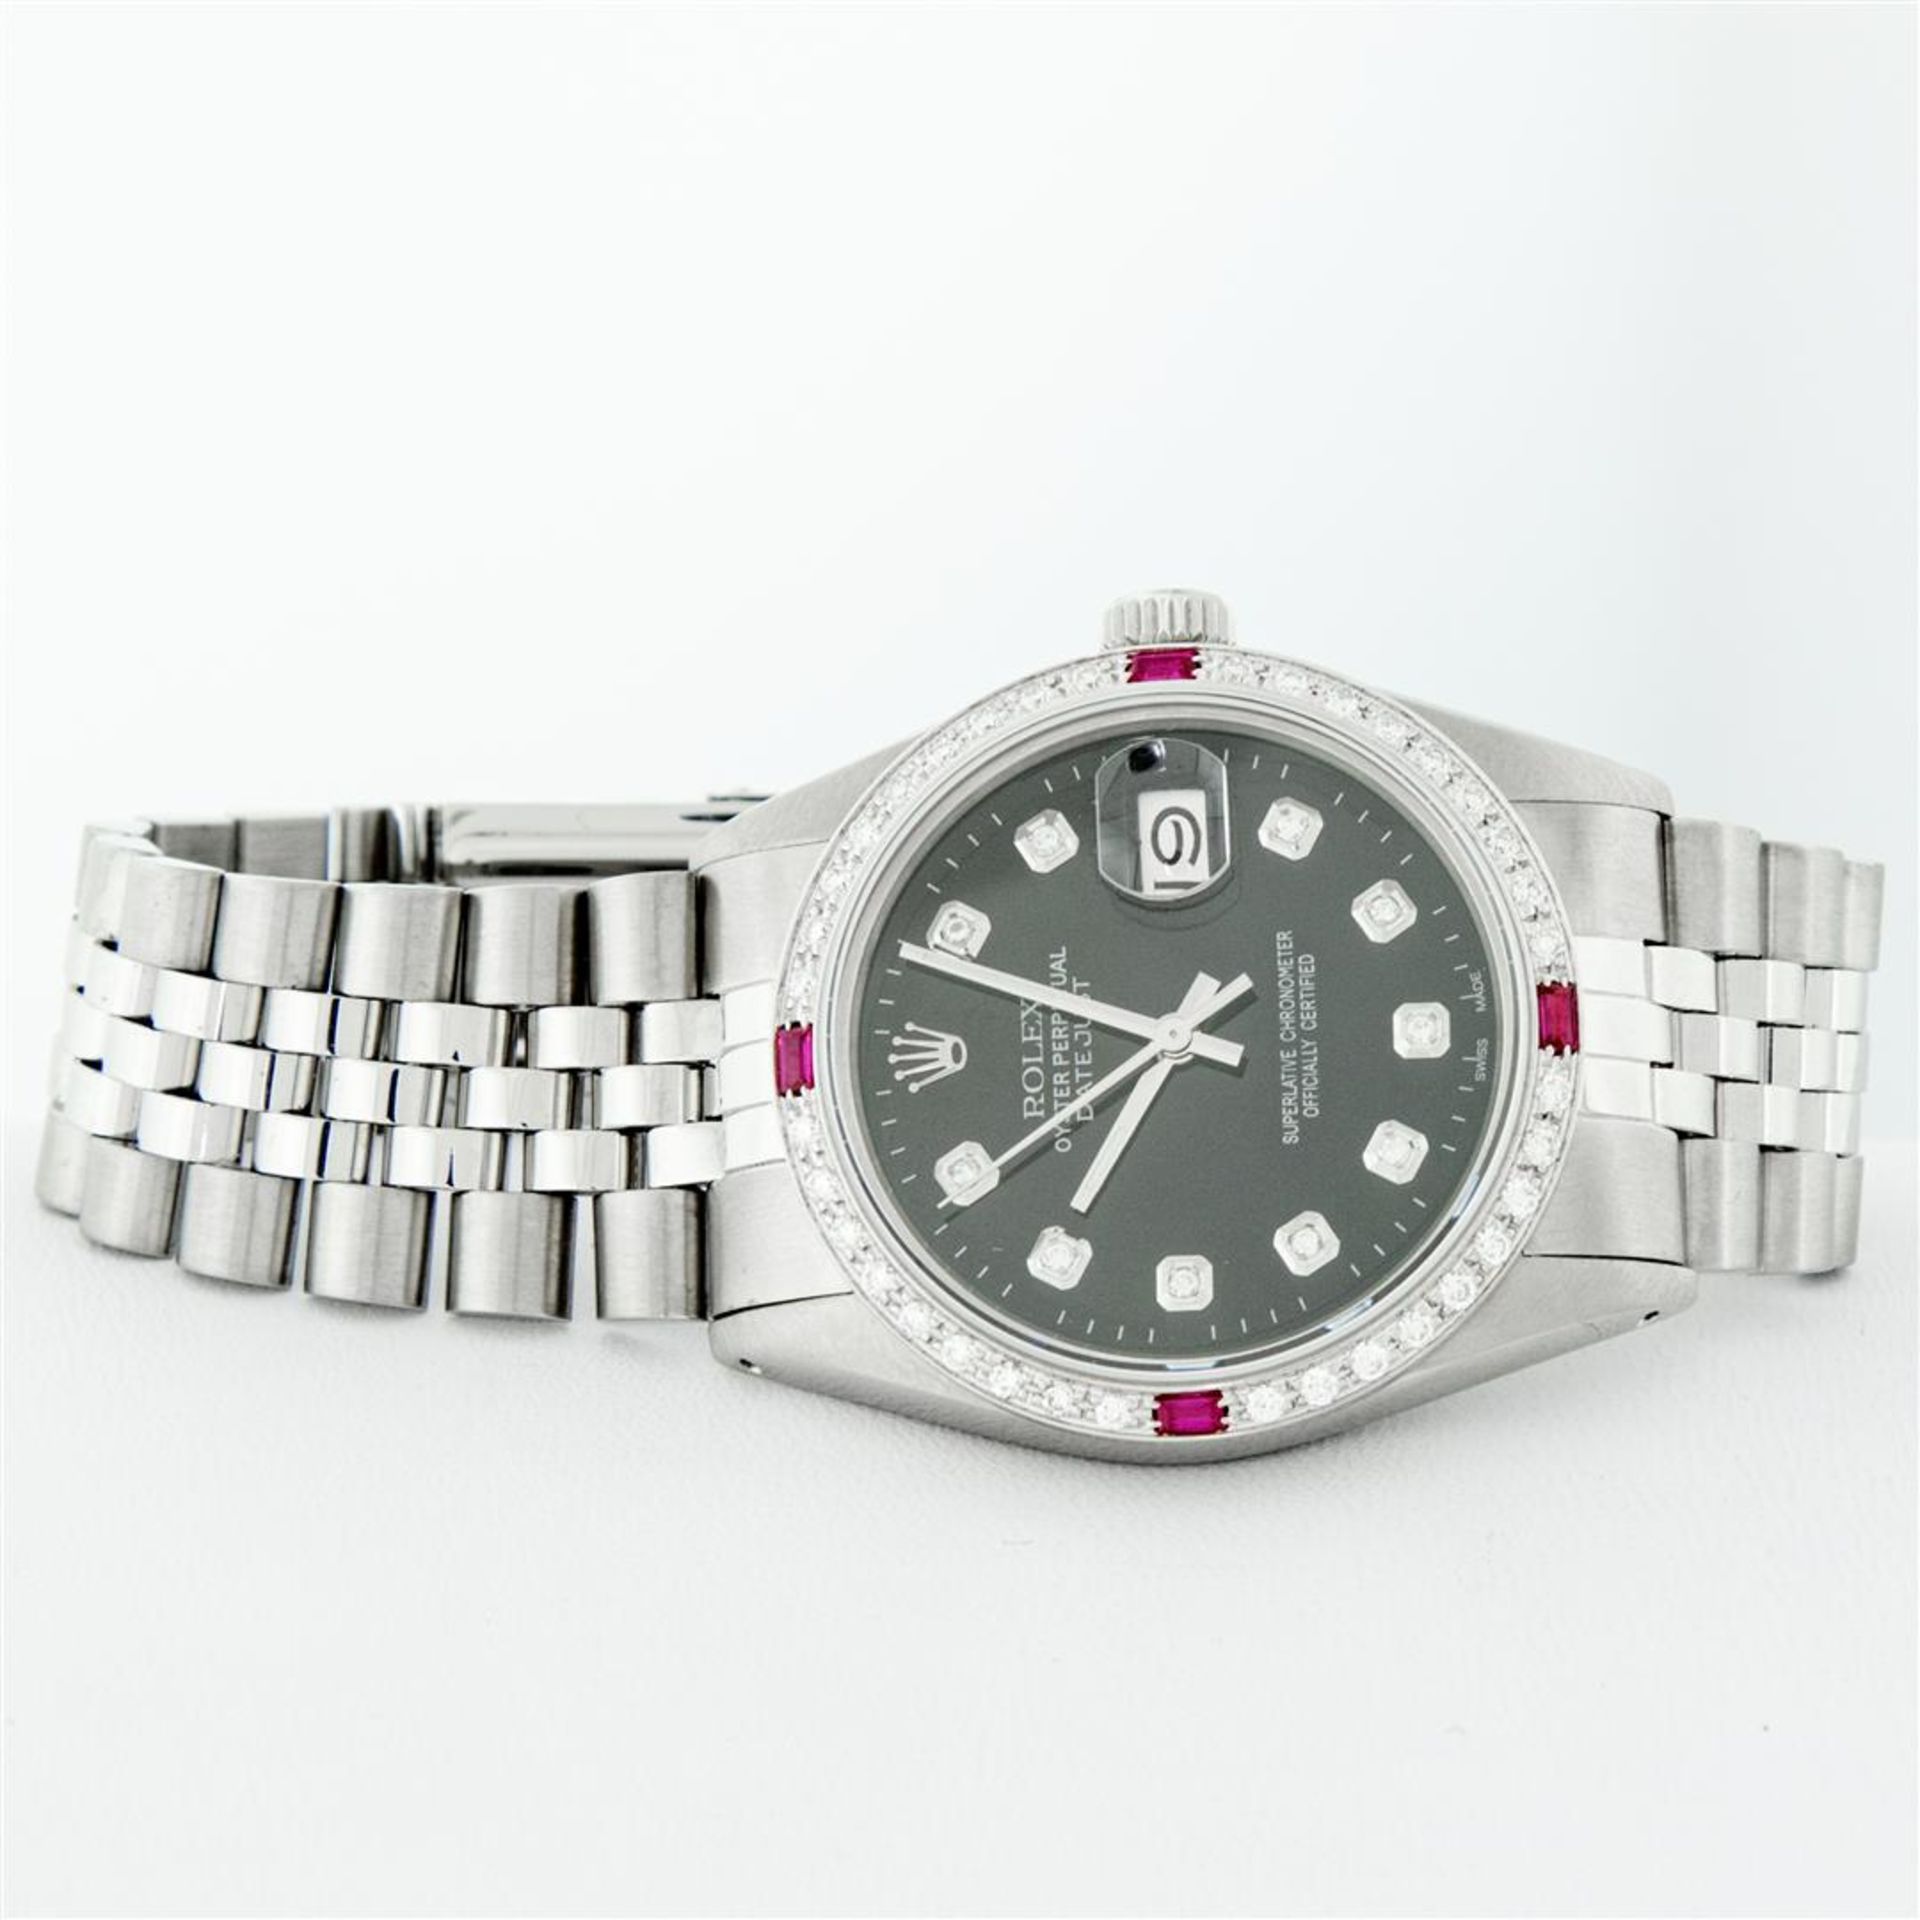 Rolex Mens Stainless Steel Black Diamond & Ruby 36MM Datejust Wristwatch Oyster - Image 4 of 9